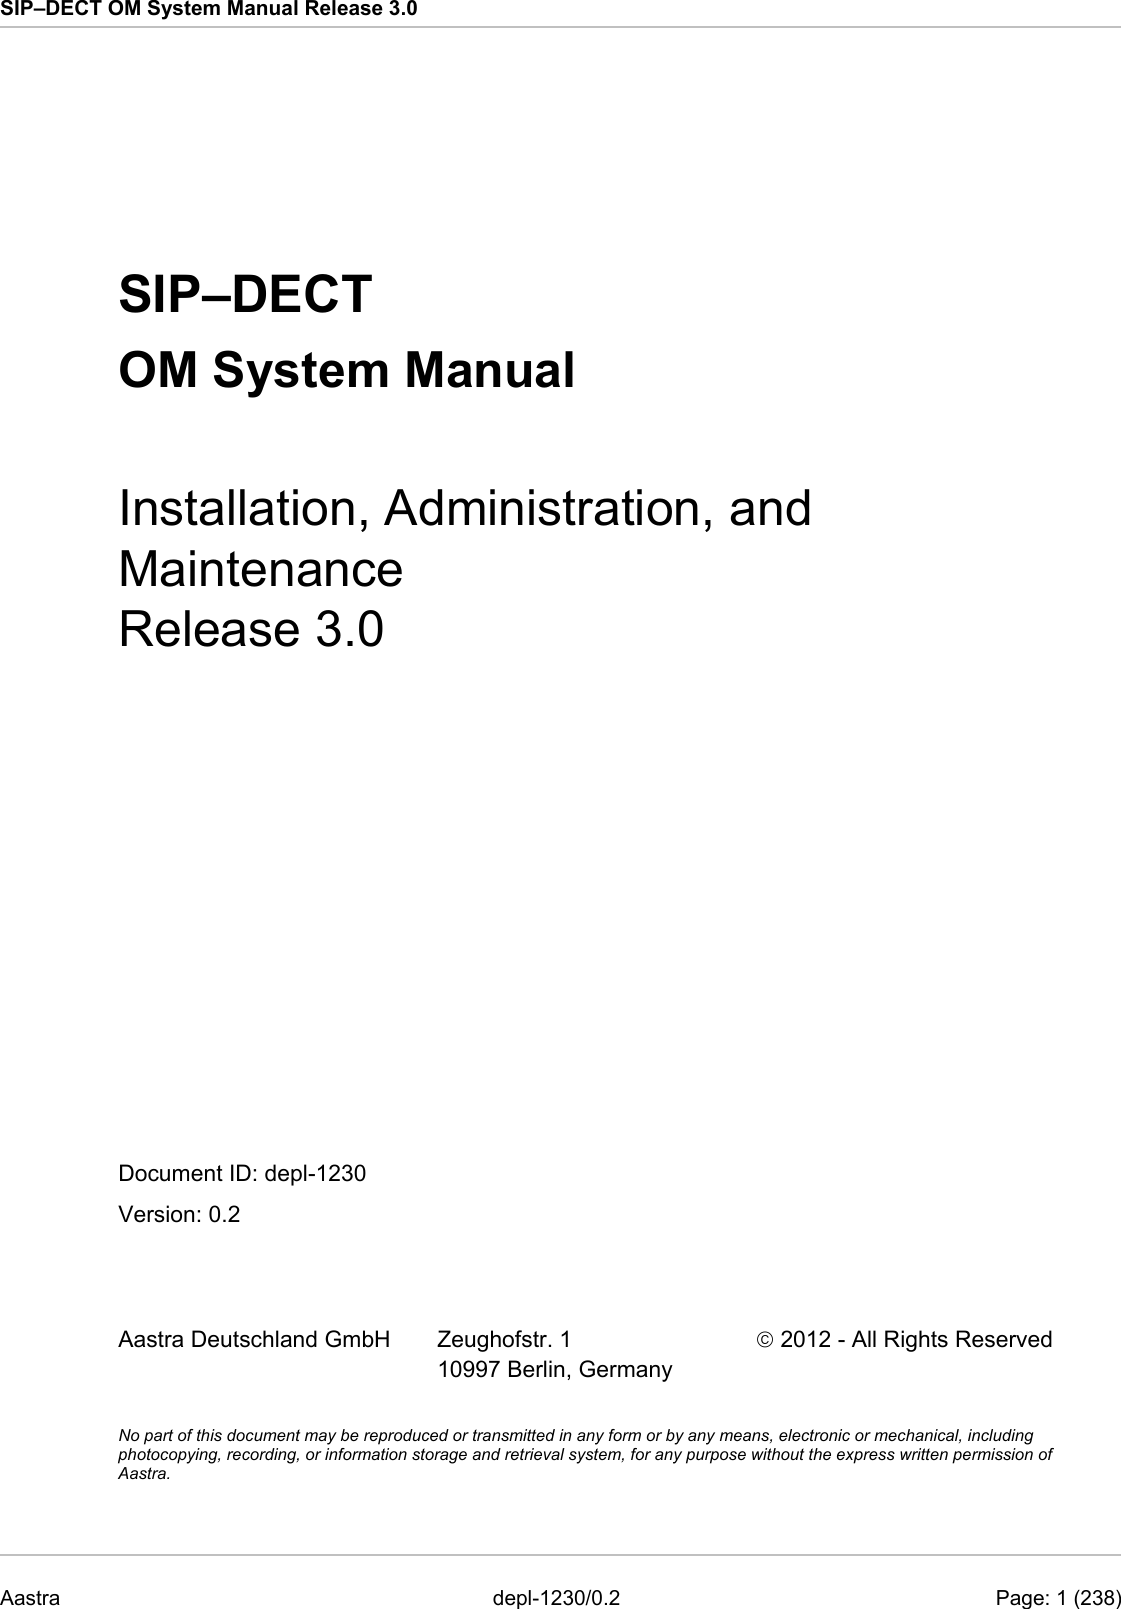 SIP–DECT OM System Manual Release 3.0   SIP–DECT OM System Manual Installation, Administration, and Maintenance Release 3.0  Document ID: depl-1230 Version: 0.2   Aastra Deutschland GmbH  Zeughofstr. 1 10997 Berlin, Germany  2012 - All Rights Reserved  No part of this document may be reproduced or transmitted in any form or by any means, electronic or mechanical, including photocopying, recording, or information storage and retrieval system, for any purpose without the express written permission of Aastra. Aastra  depl-1230/0.2    Page: 1 (238) 